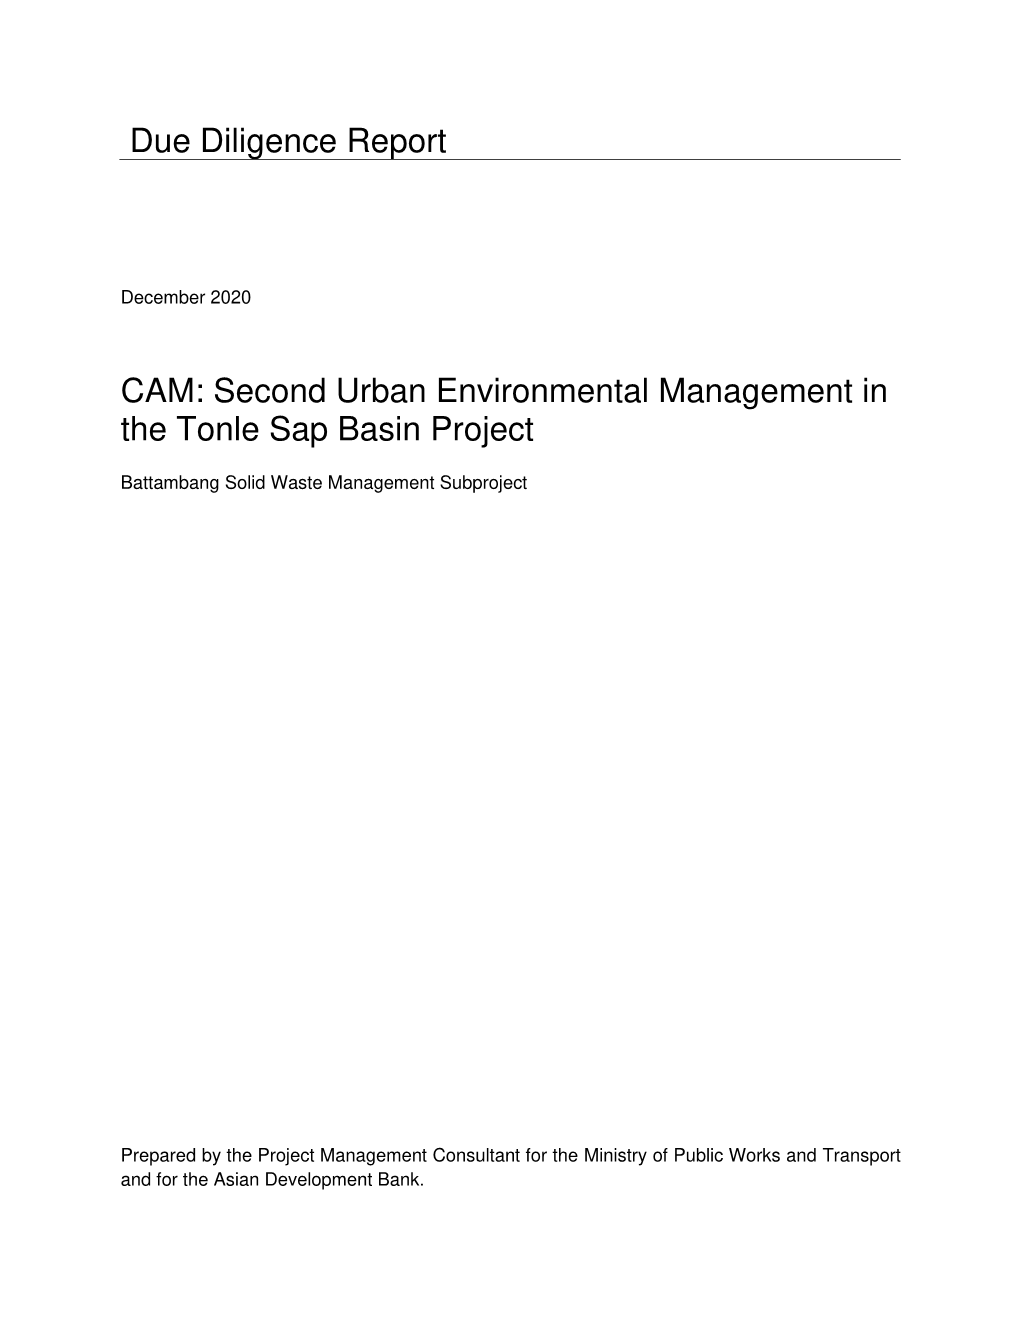 Due Diligence Report CAM: Second Urban Environmental Management in the Tonle Sap Basin Project